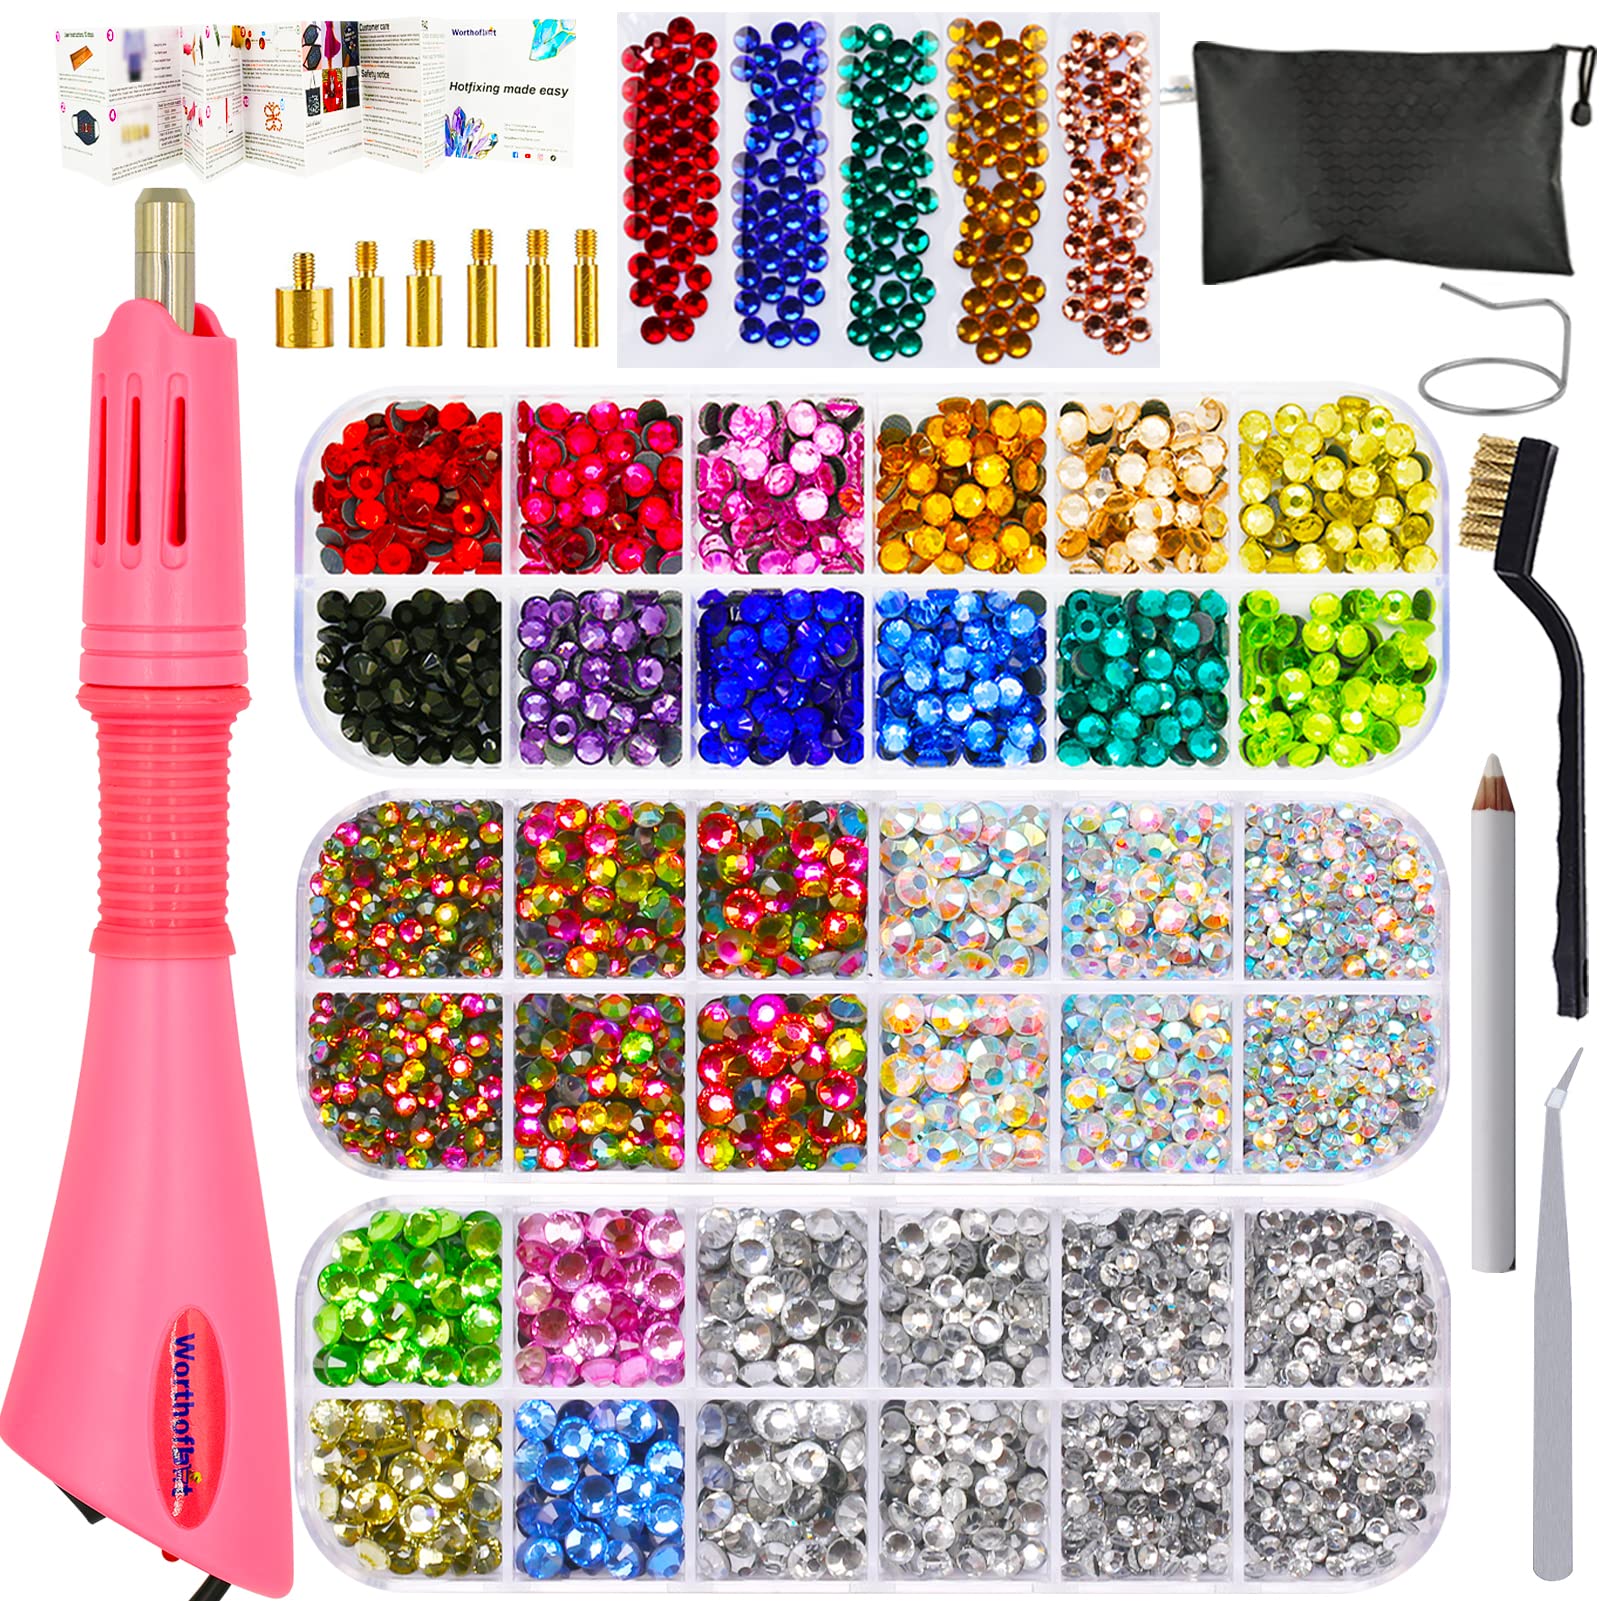 Hotfix Rhinestone Applicator Tool Kit with Gems - Multicolor for